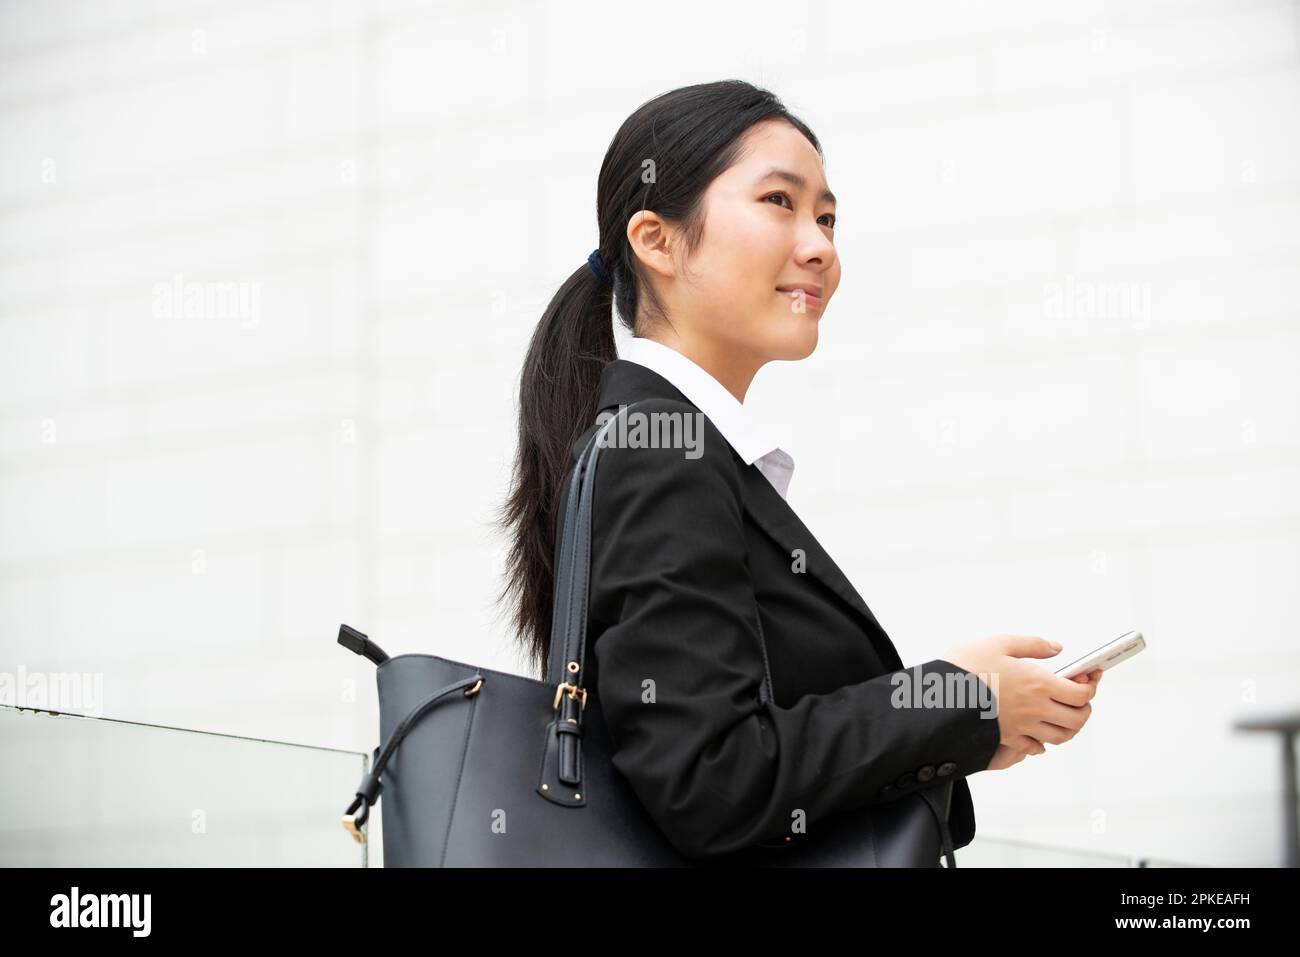 Woman in suit holding phone Stock Photo